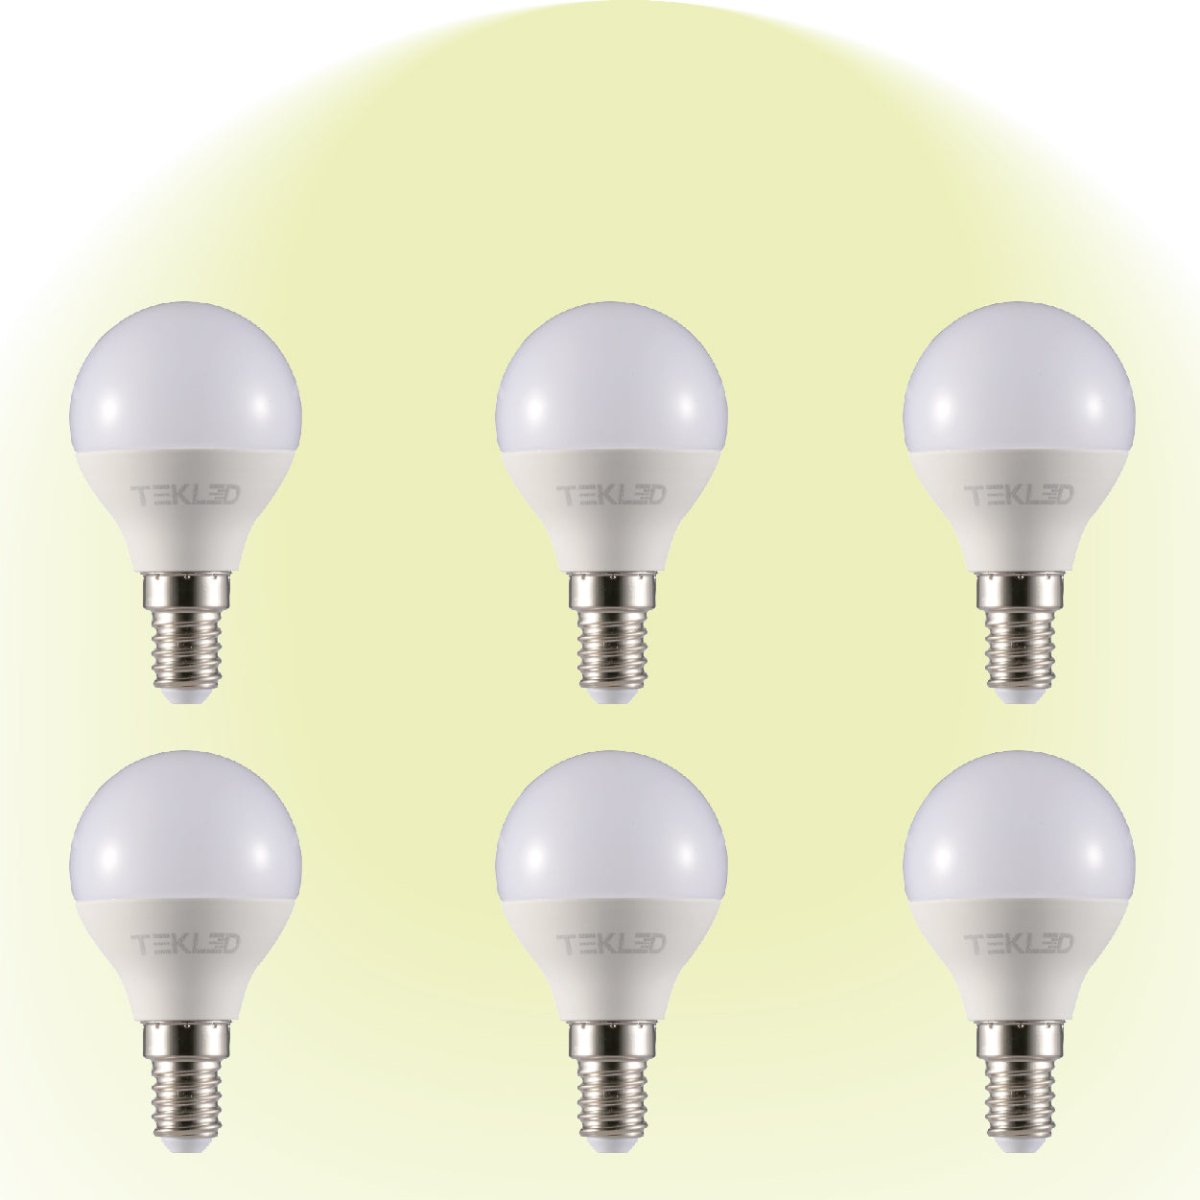 4000K cool white Canes LED Golf Ball Bulb P45 Dimmable E14 Small Edison Screw 6W 6 pack